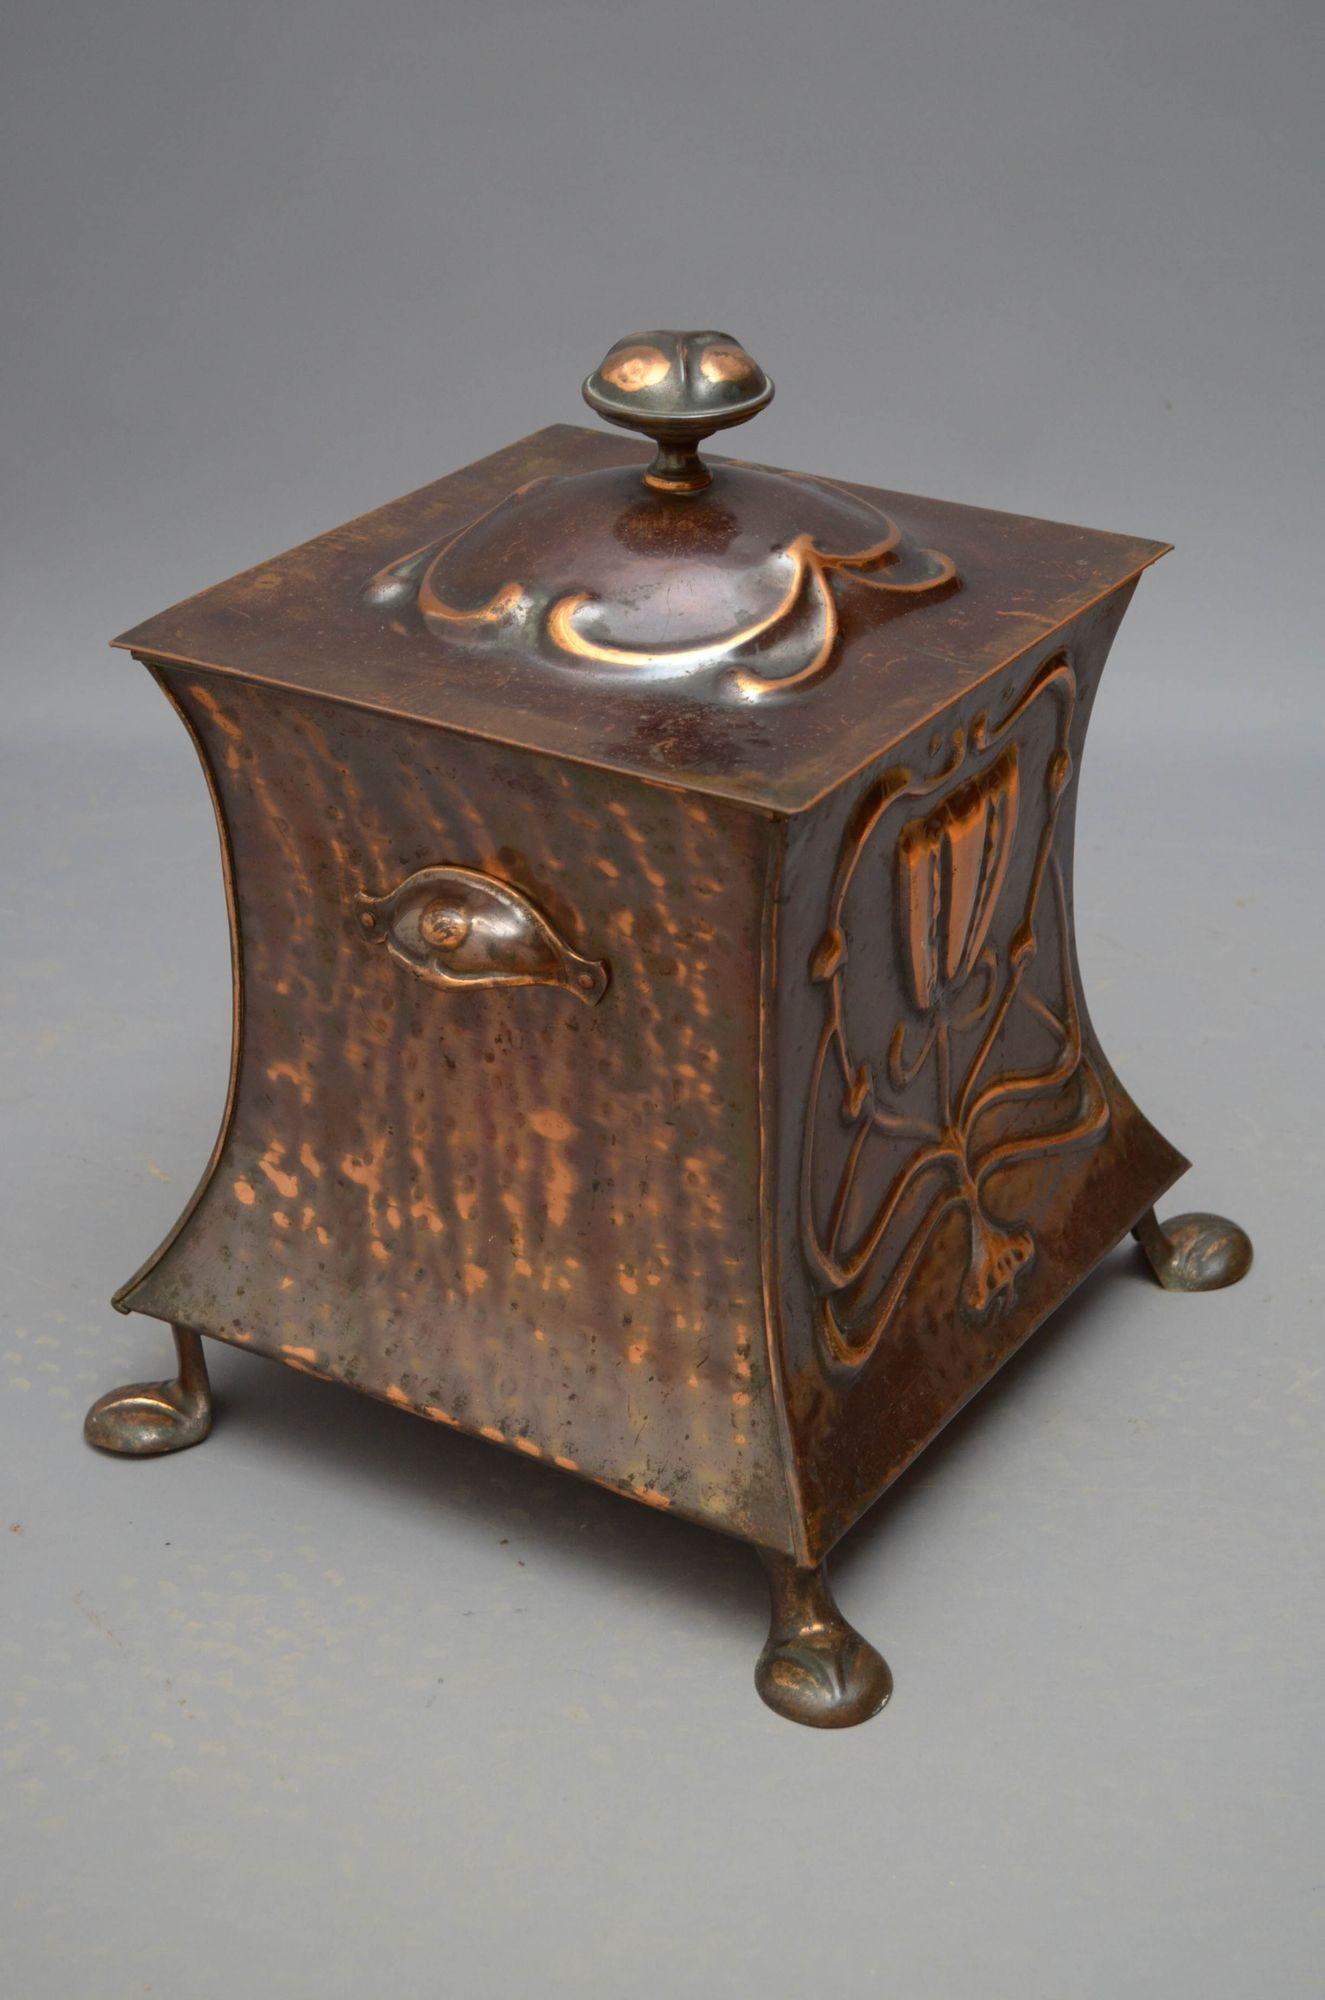 Sn5337 Stylish Art Nouveau copper coal bin with, having scroll embossed lid enclosing a liner, two carrying handles, decorative design to the front and pad feet. This antique coal bin is in home ready condition. c1900
H17.5